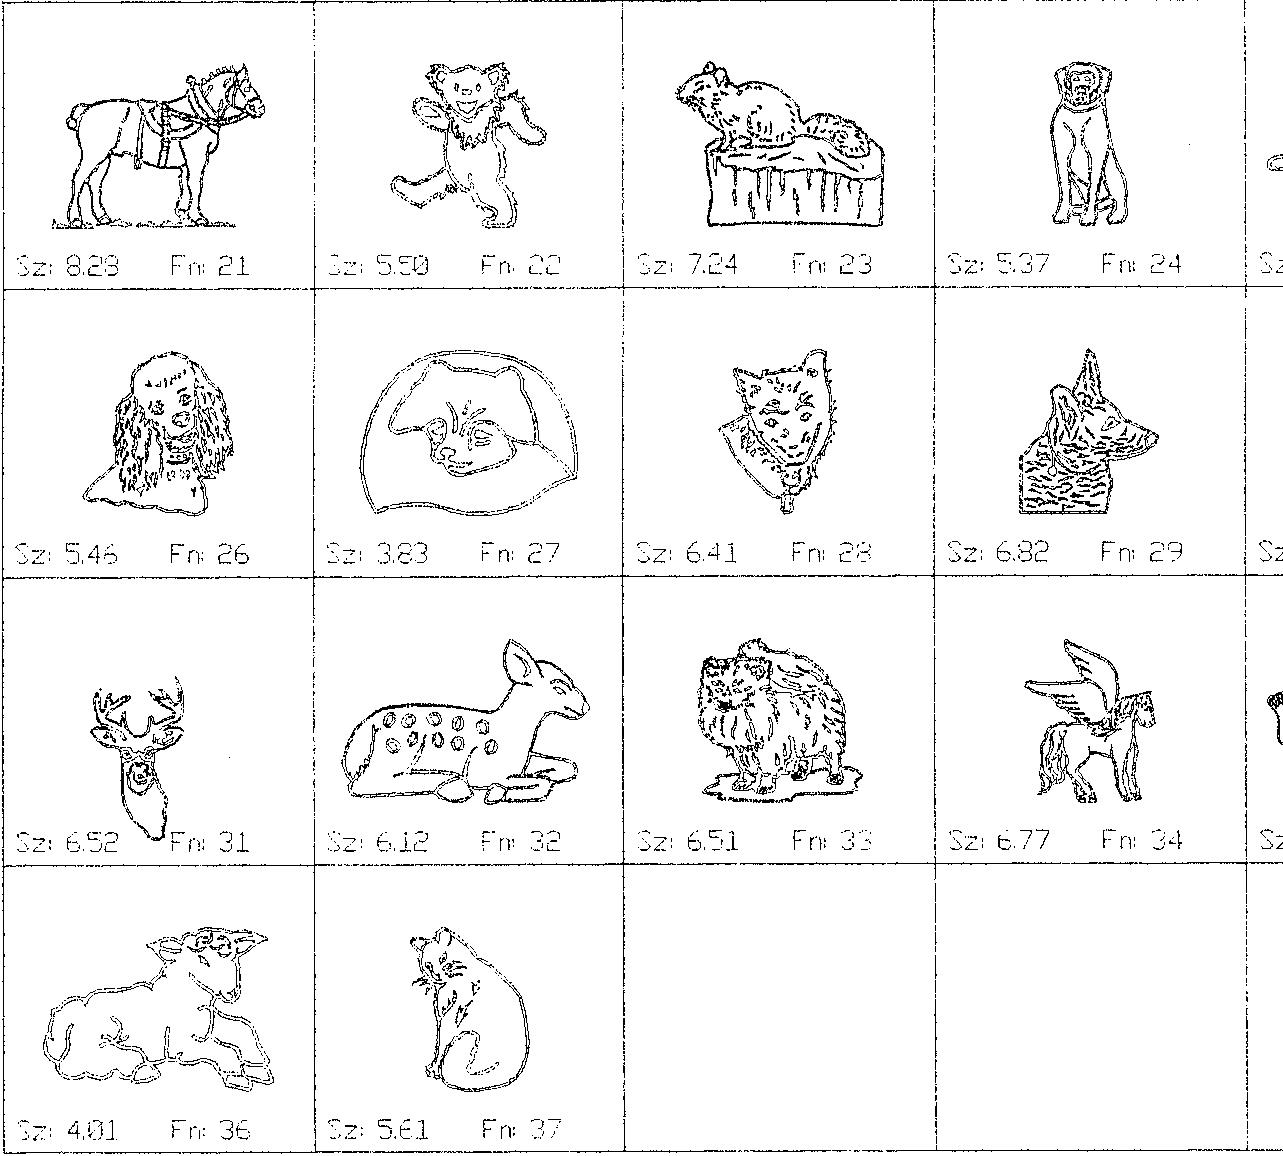 a black and white drawing of various animals on a white background